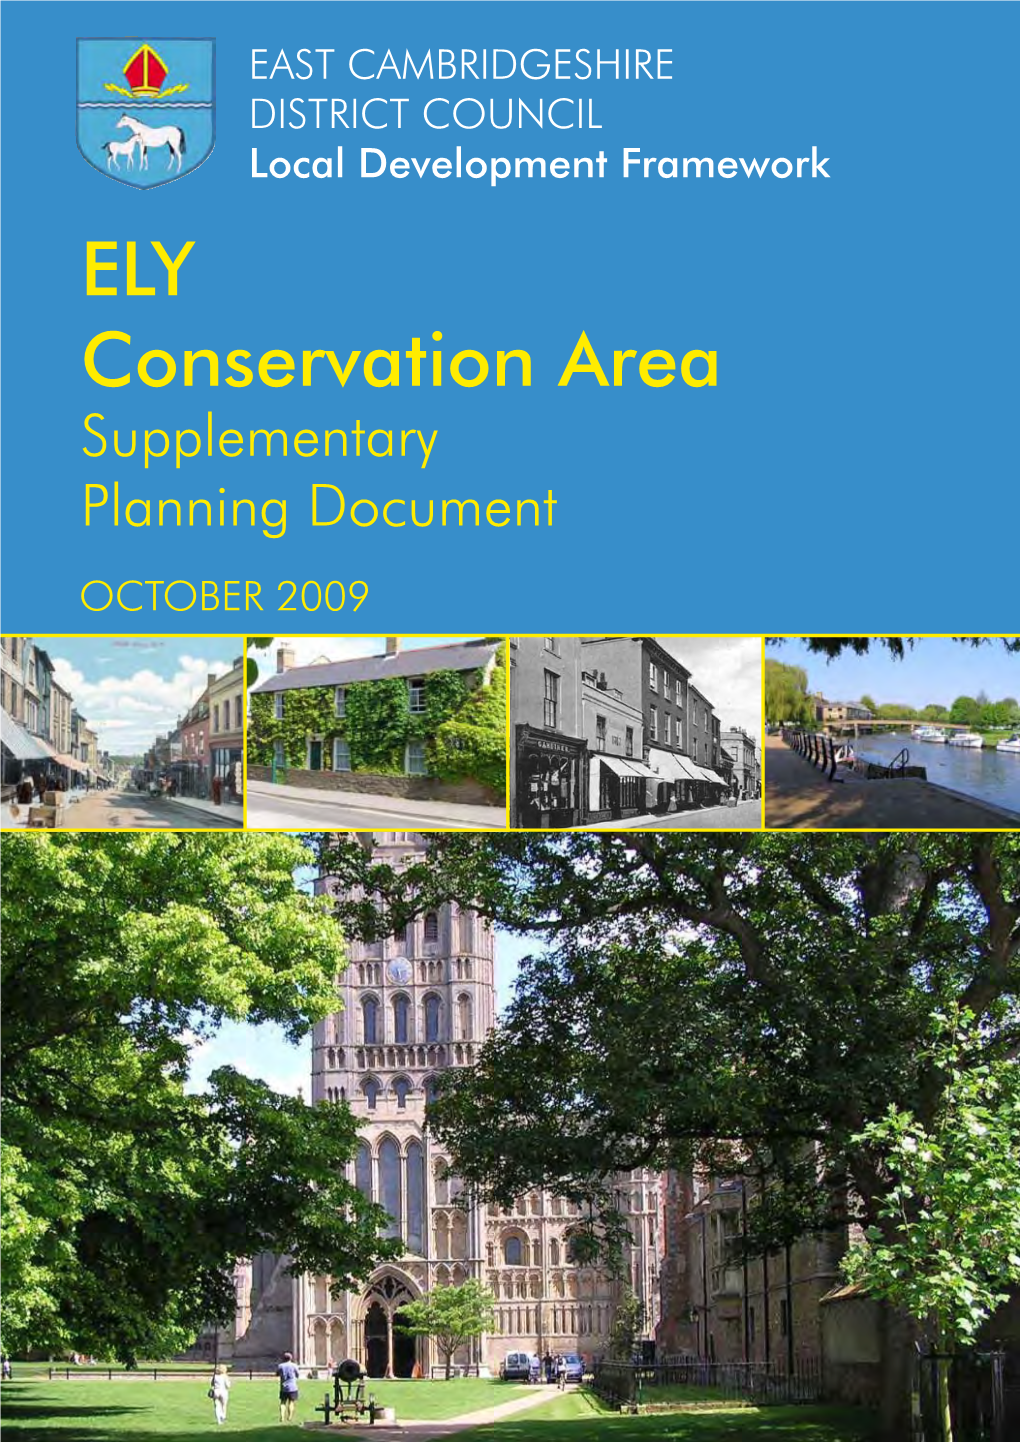 ELY Conservation Area Supplementary Planning Document OCTOBER 2009 1 Introduction P.3